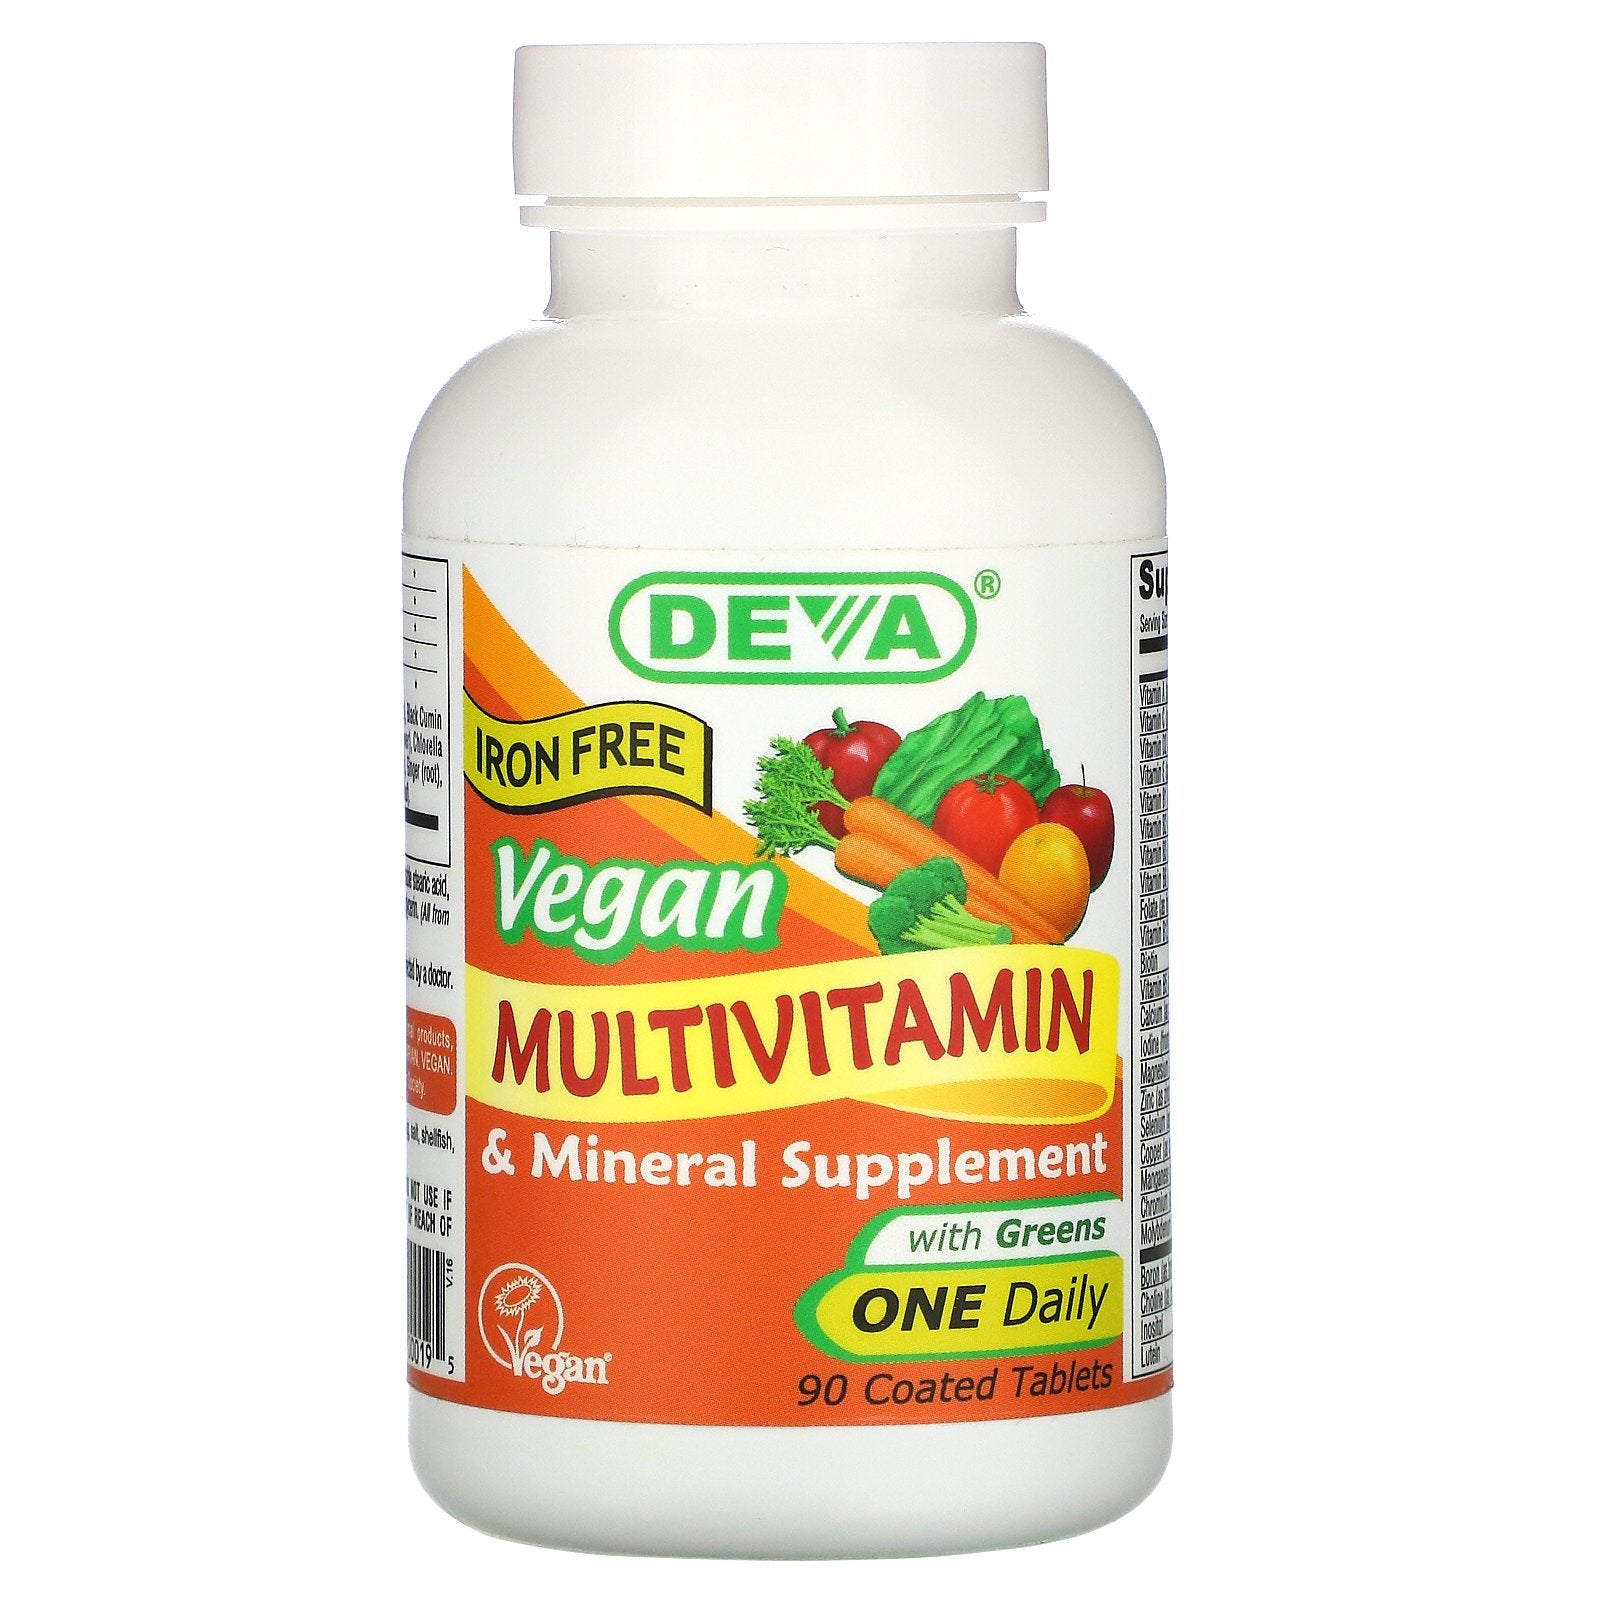 Deva, Vegan Multivitamin & Mineral Supplement with Greens, Iron Free, 90 Coated Tablets